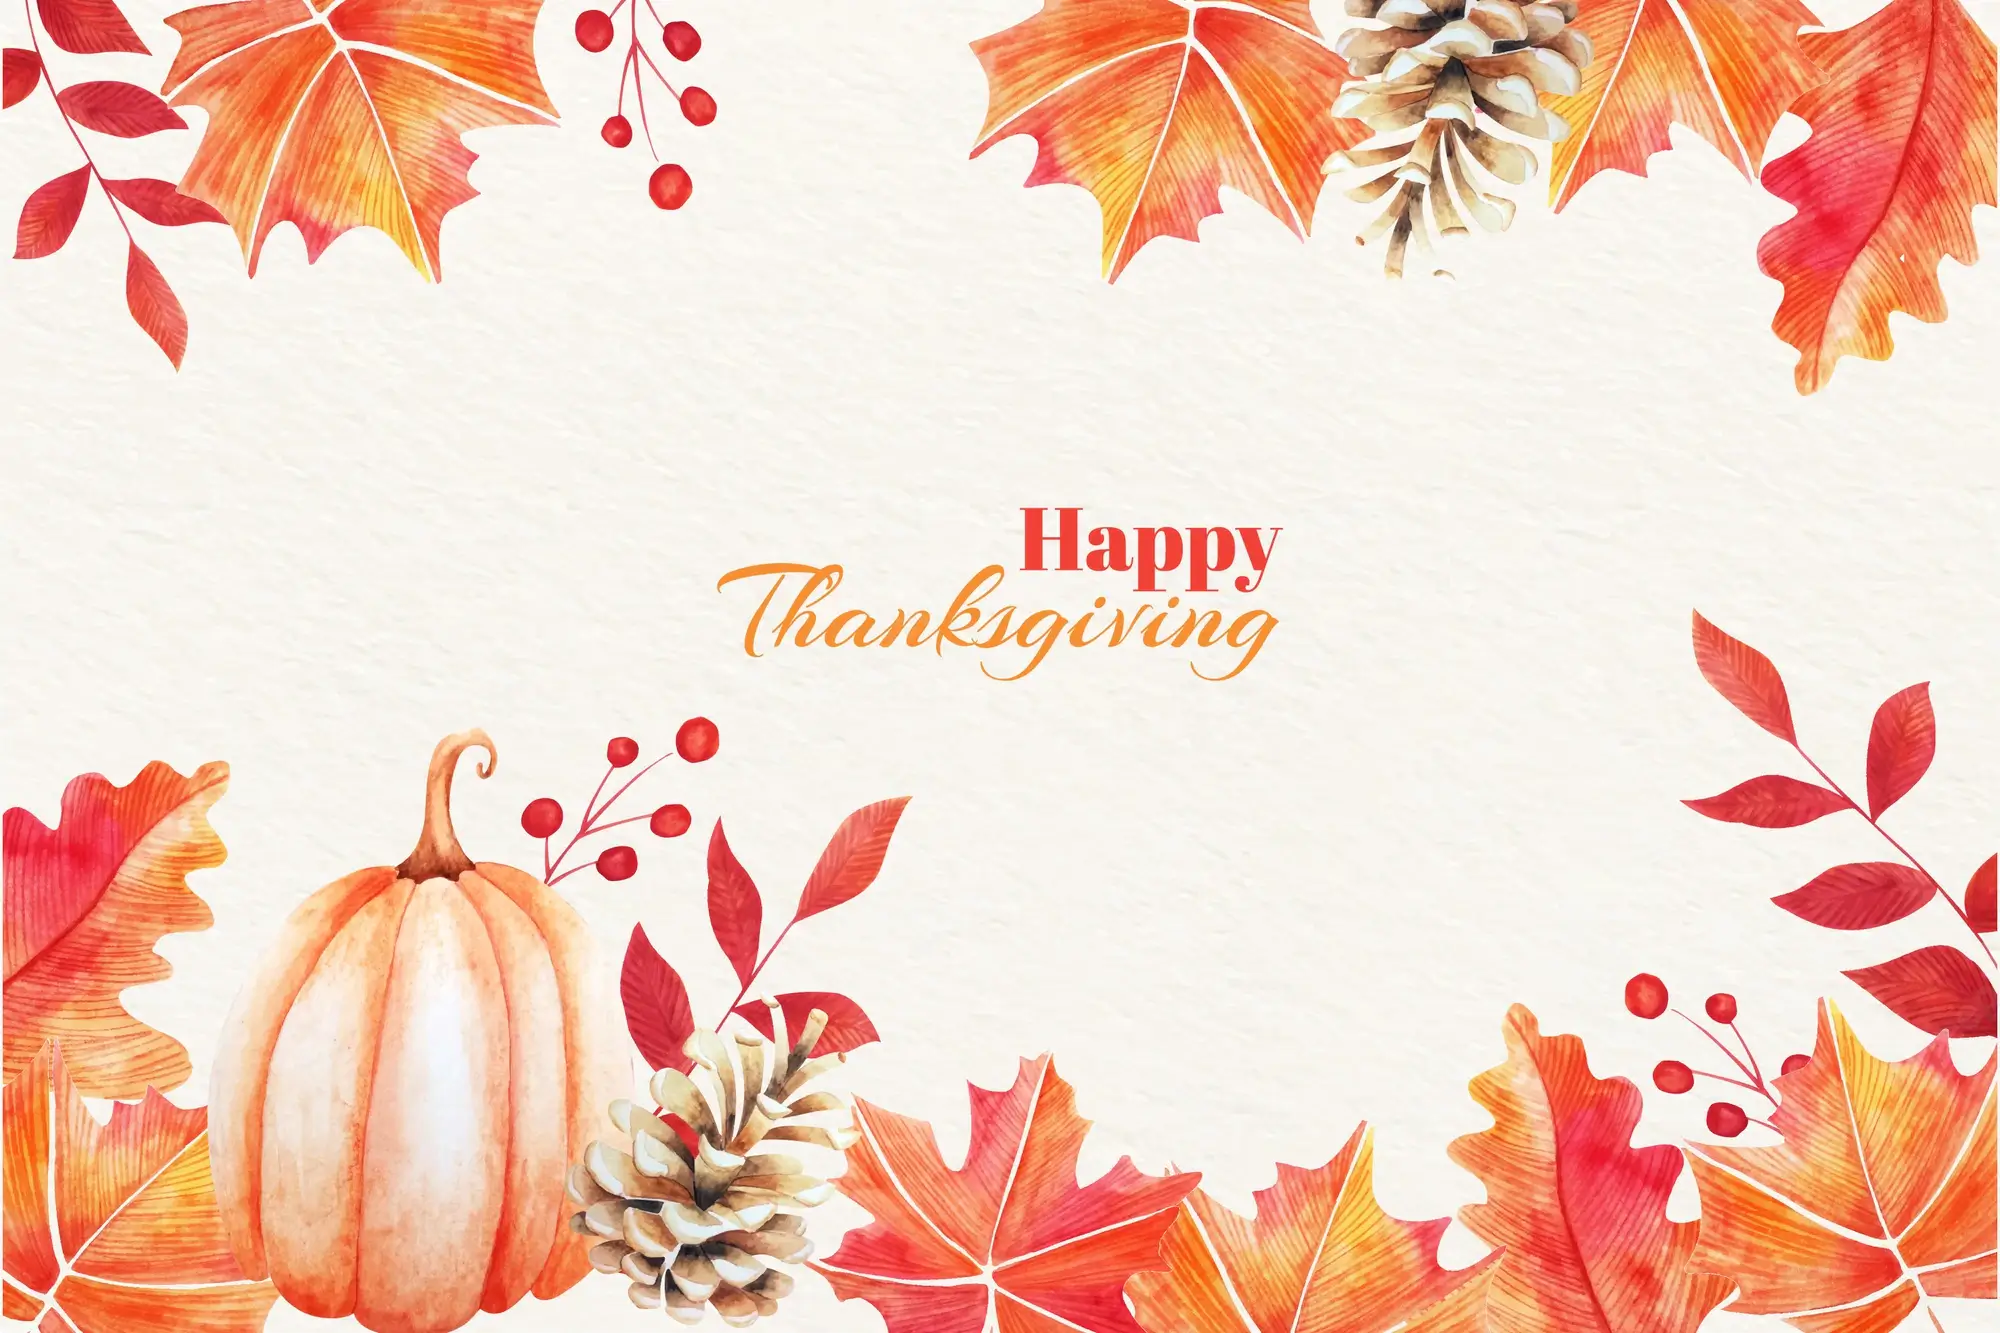 Happy Thanksgiving Images Pictures Photos HD Pics Wallpapers Free Download 3